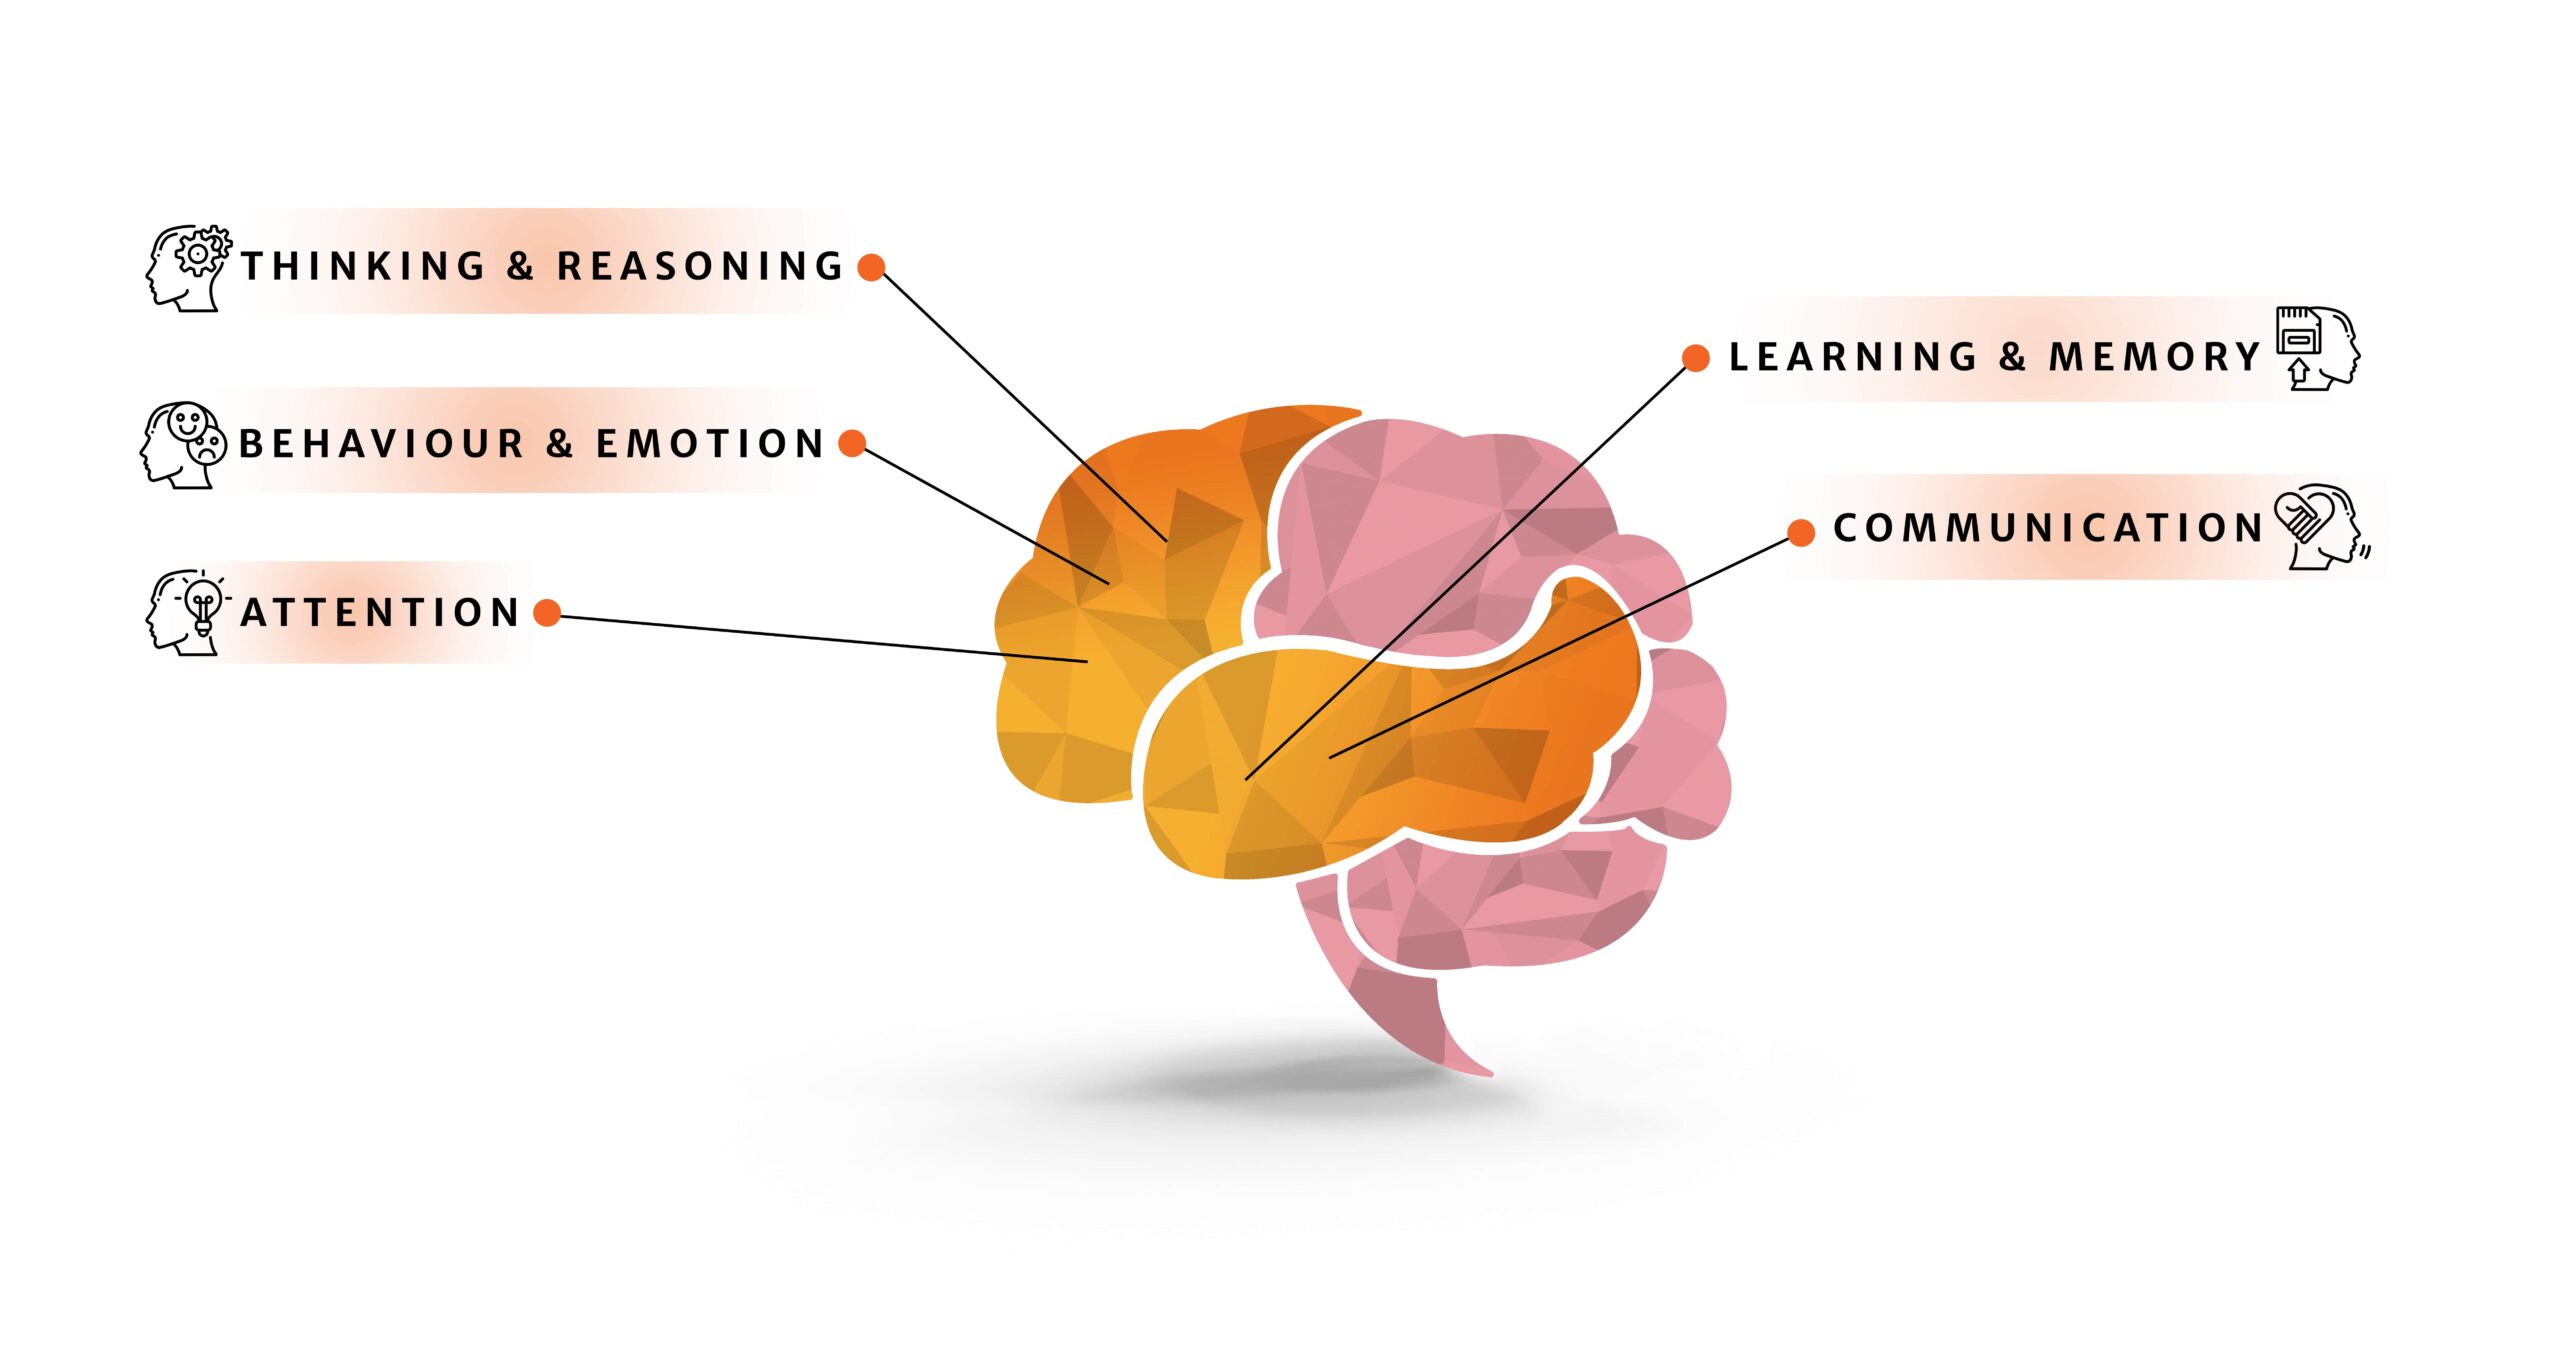 Examples of cognitive functions: thinking & reasoning, behaviour & emotion, attention, learning & memory, communication